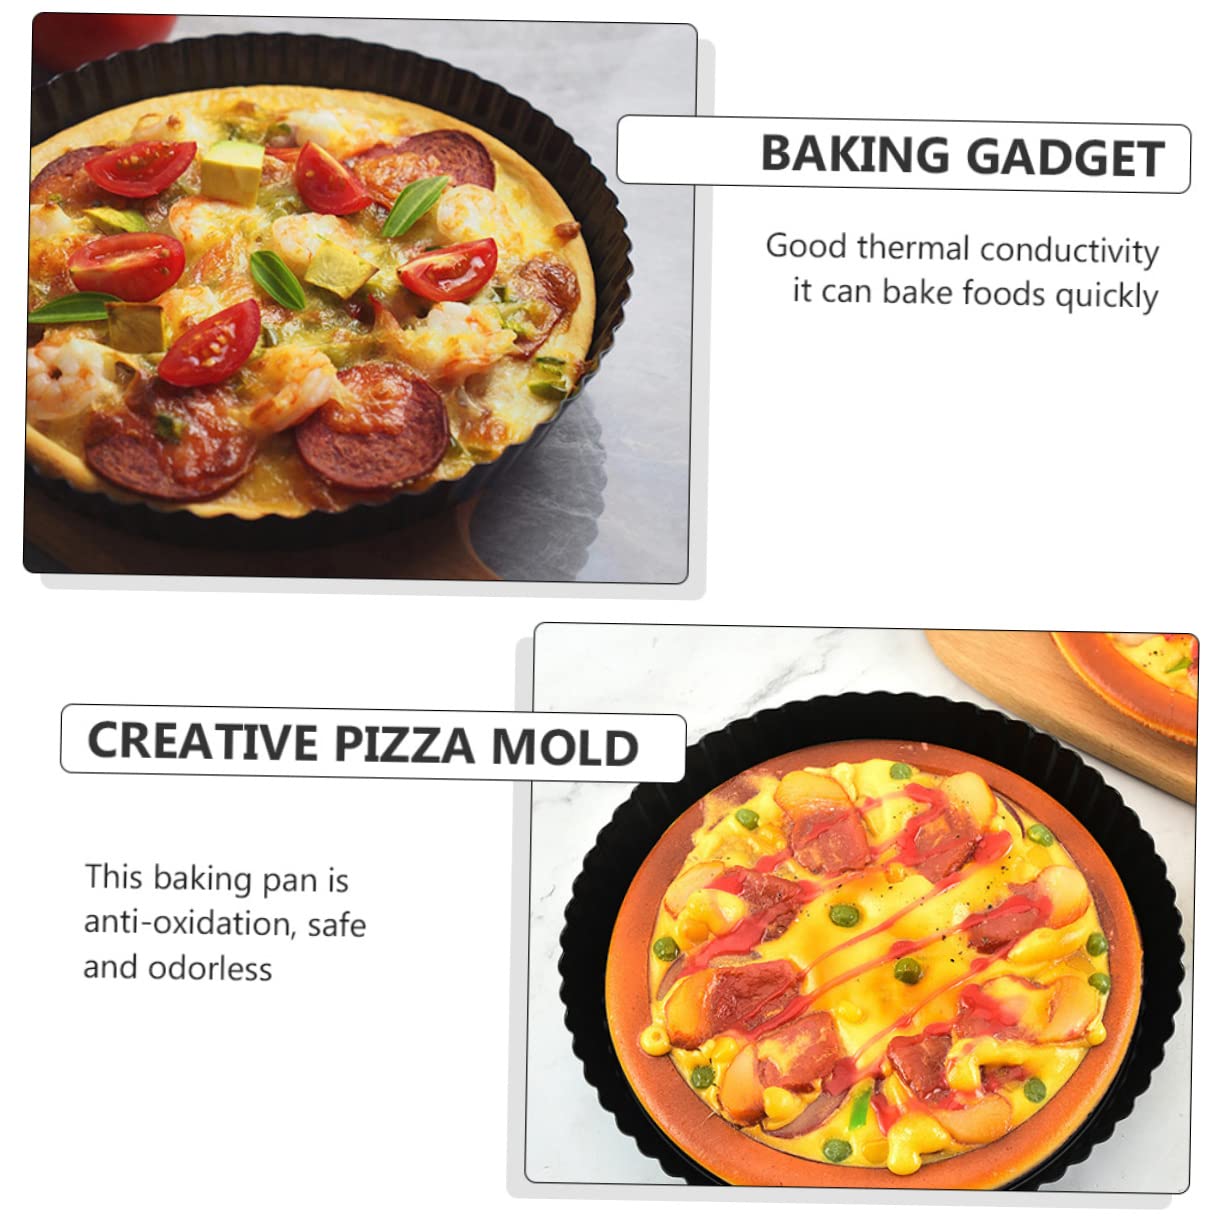 DOITOOL 2 Pcs Pizza Plate Cookie Oven Cupcake Baking Pan Cookie Pie Baking Pan Pizza Baking Dish Cake Pan with Removable Bottom Pizza DIY Convenient Baking Tray Novel Cake